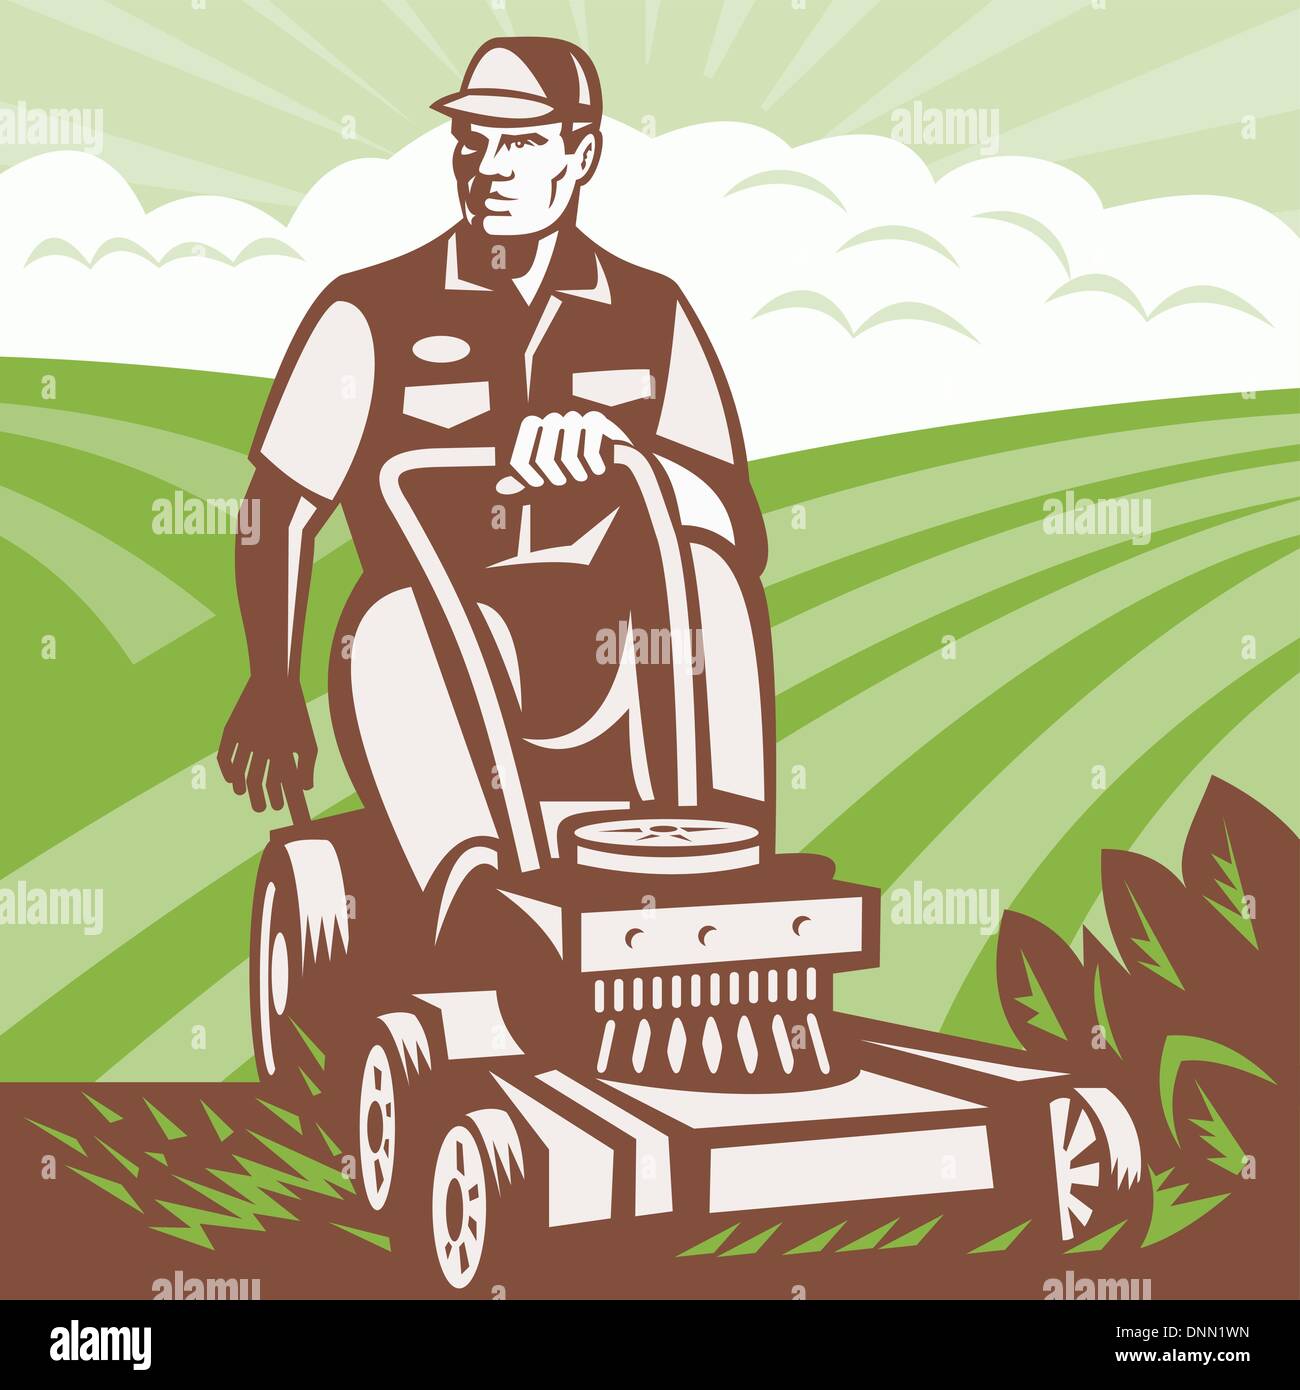 A mowing Stock Vector Images - Alamy